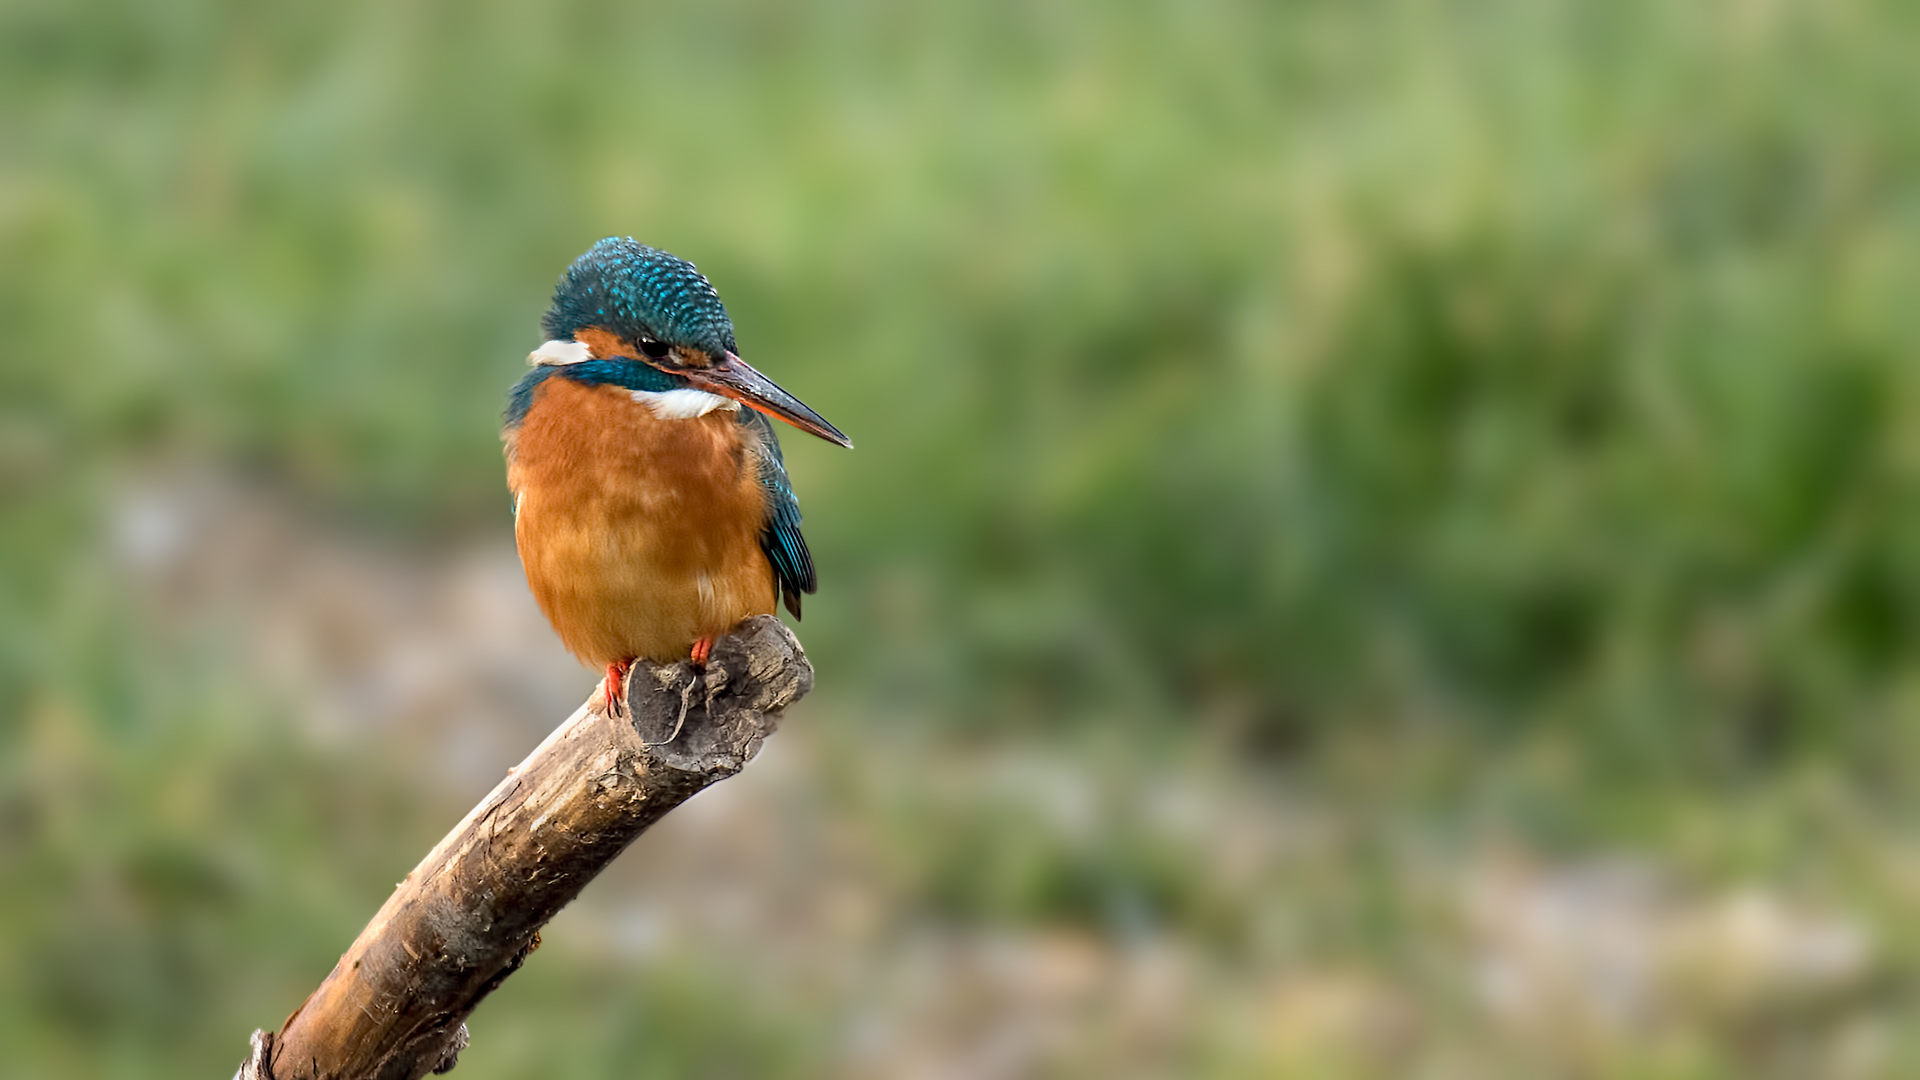 Female Kingfisher on Perch